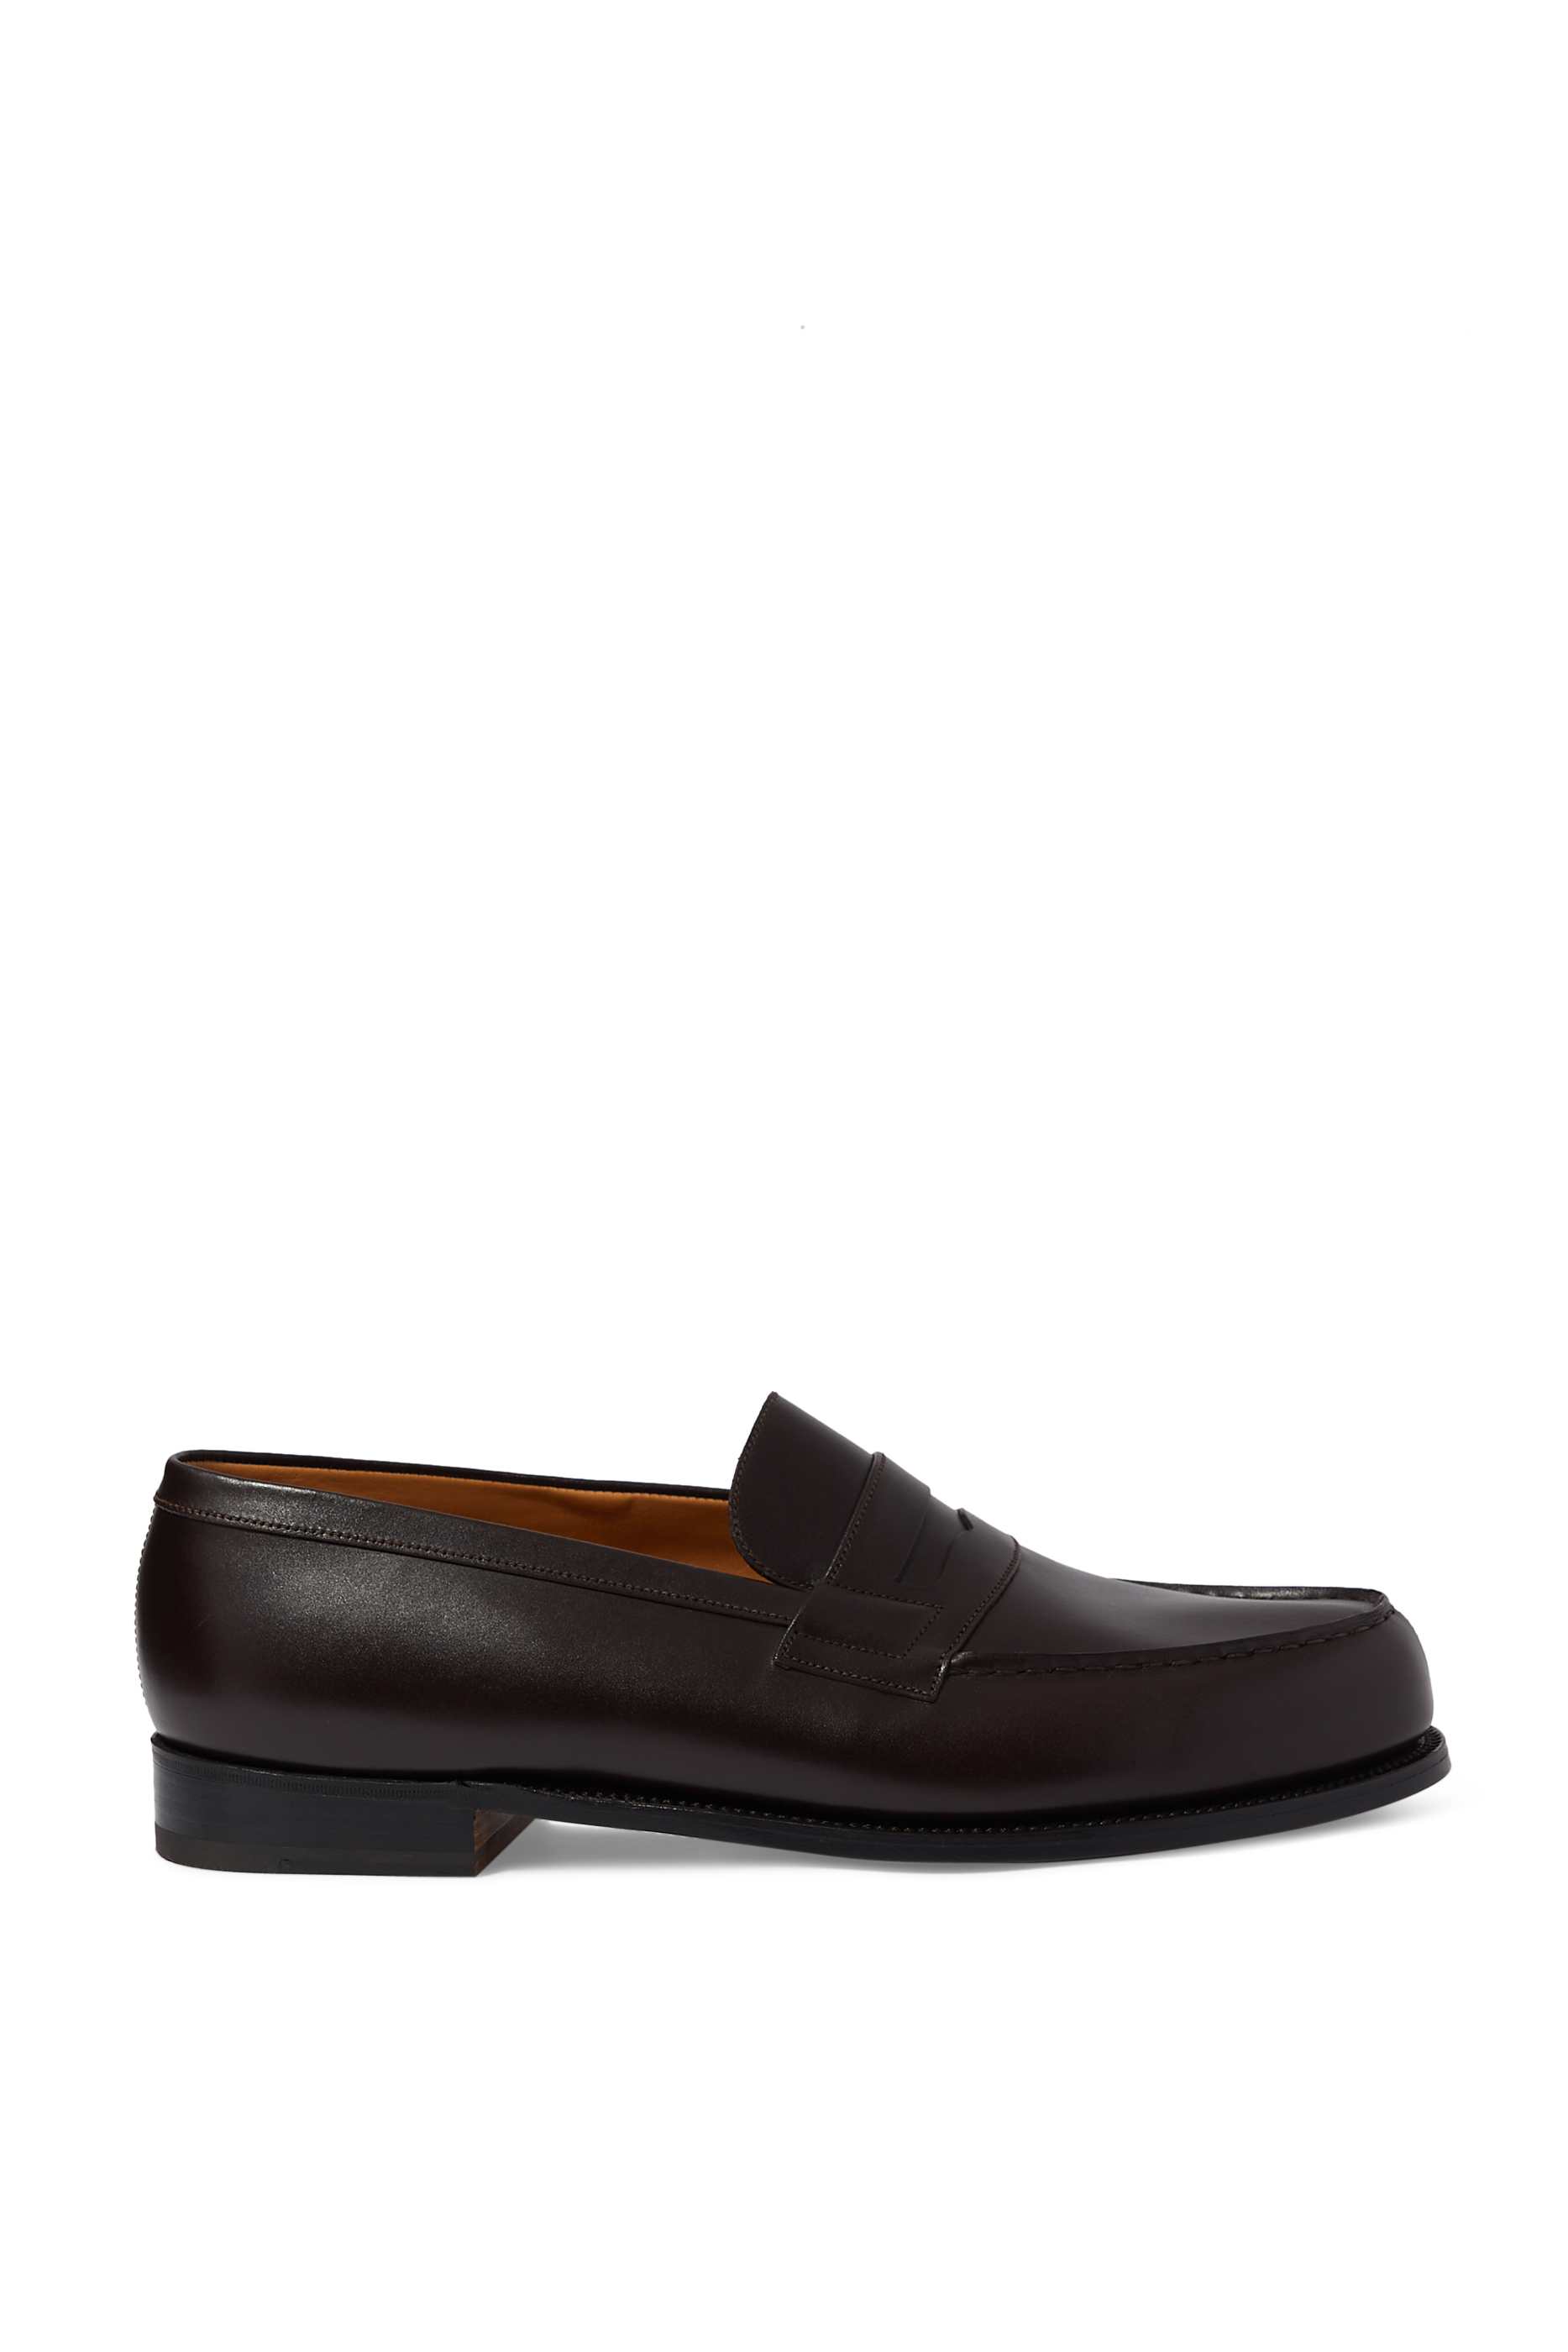 Buy J.M Weston Iconic Penny Loafers for Mens | Bloomingdale's UAE